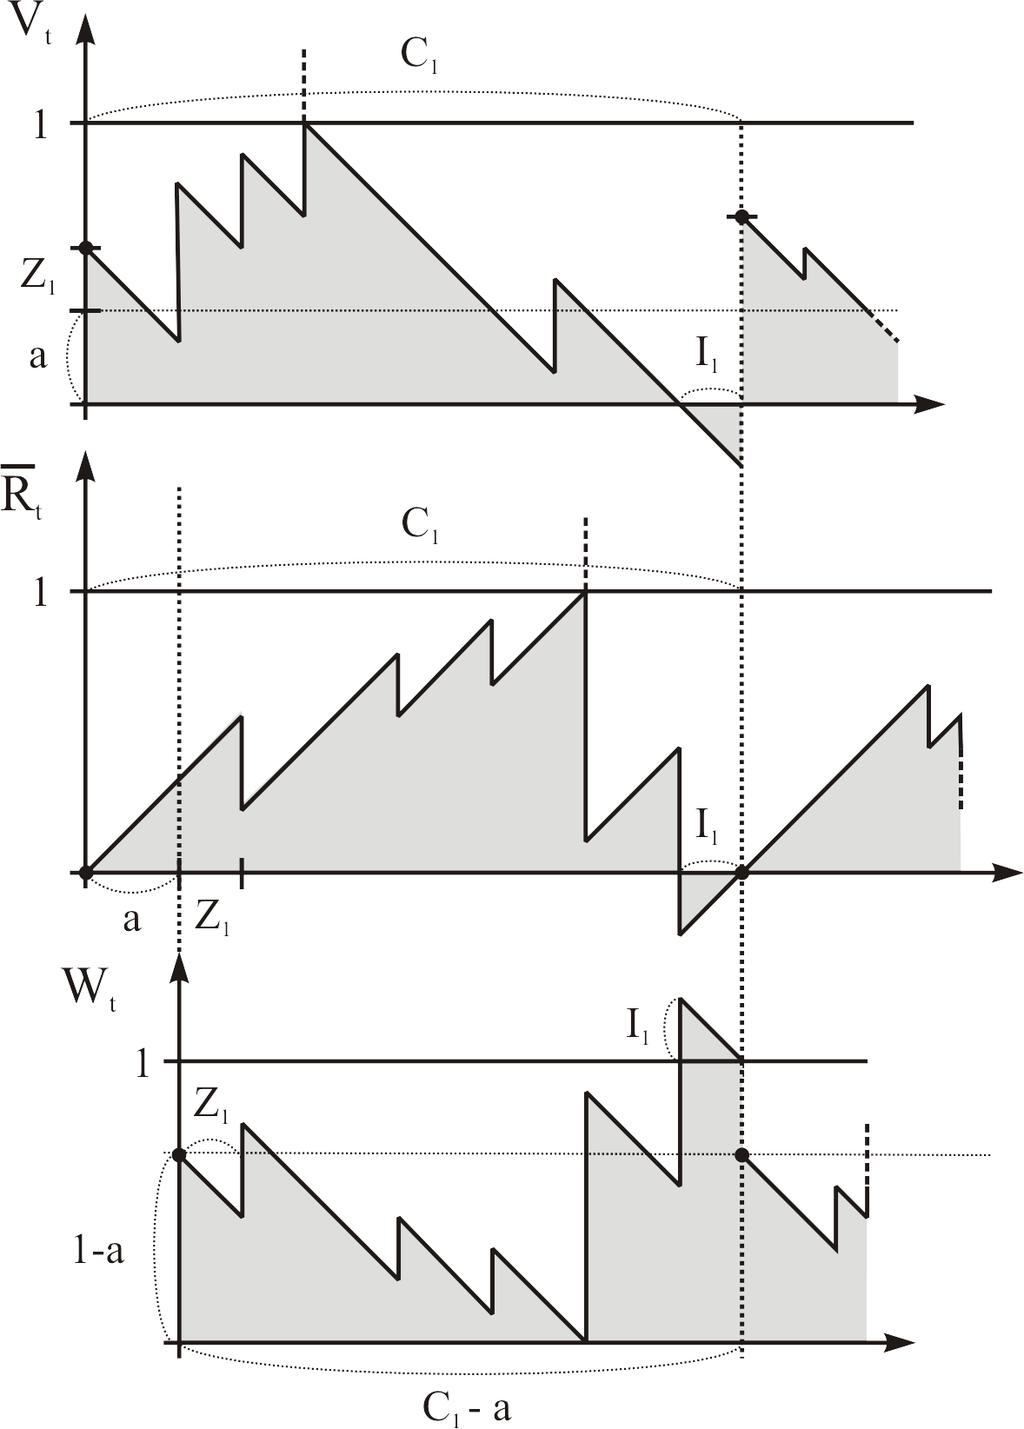 Figure 4: Construction of the processes R and W and equating the two averages leads to the first line in (11).